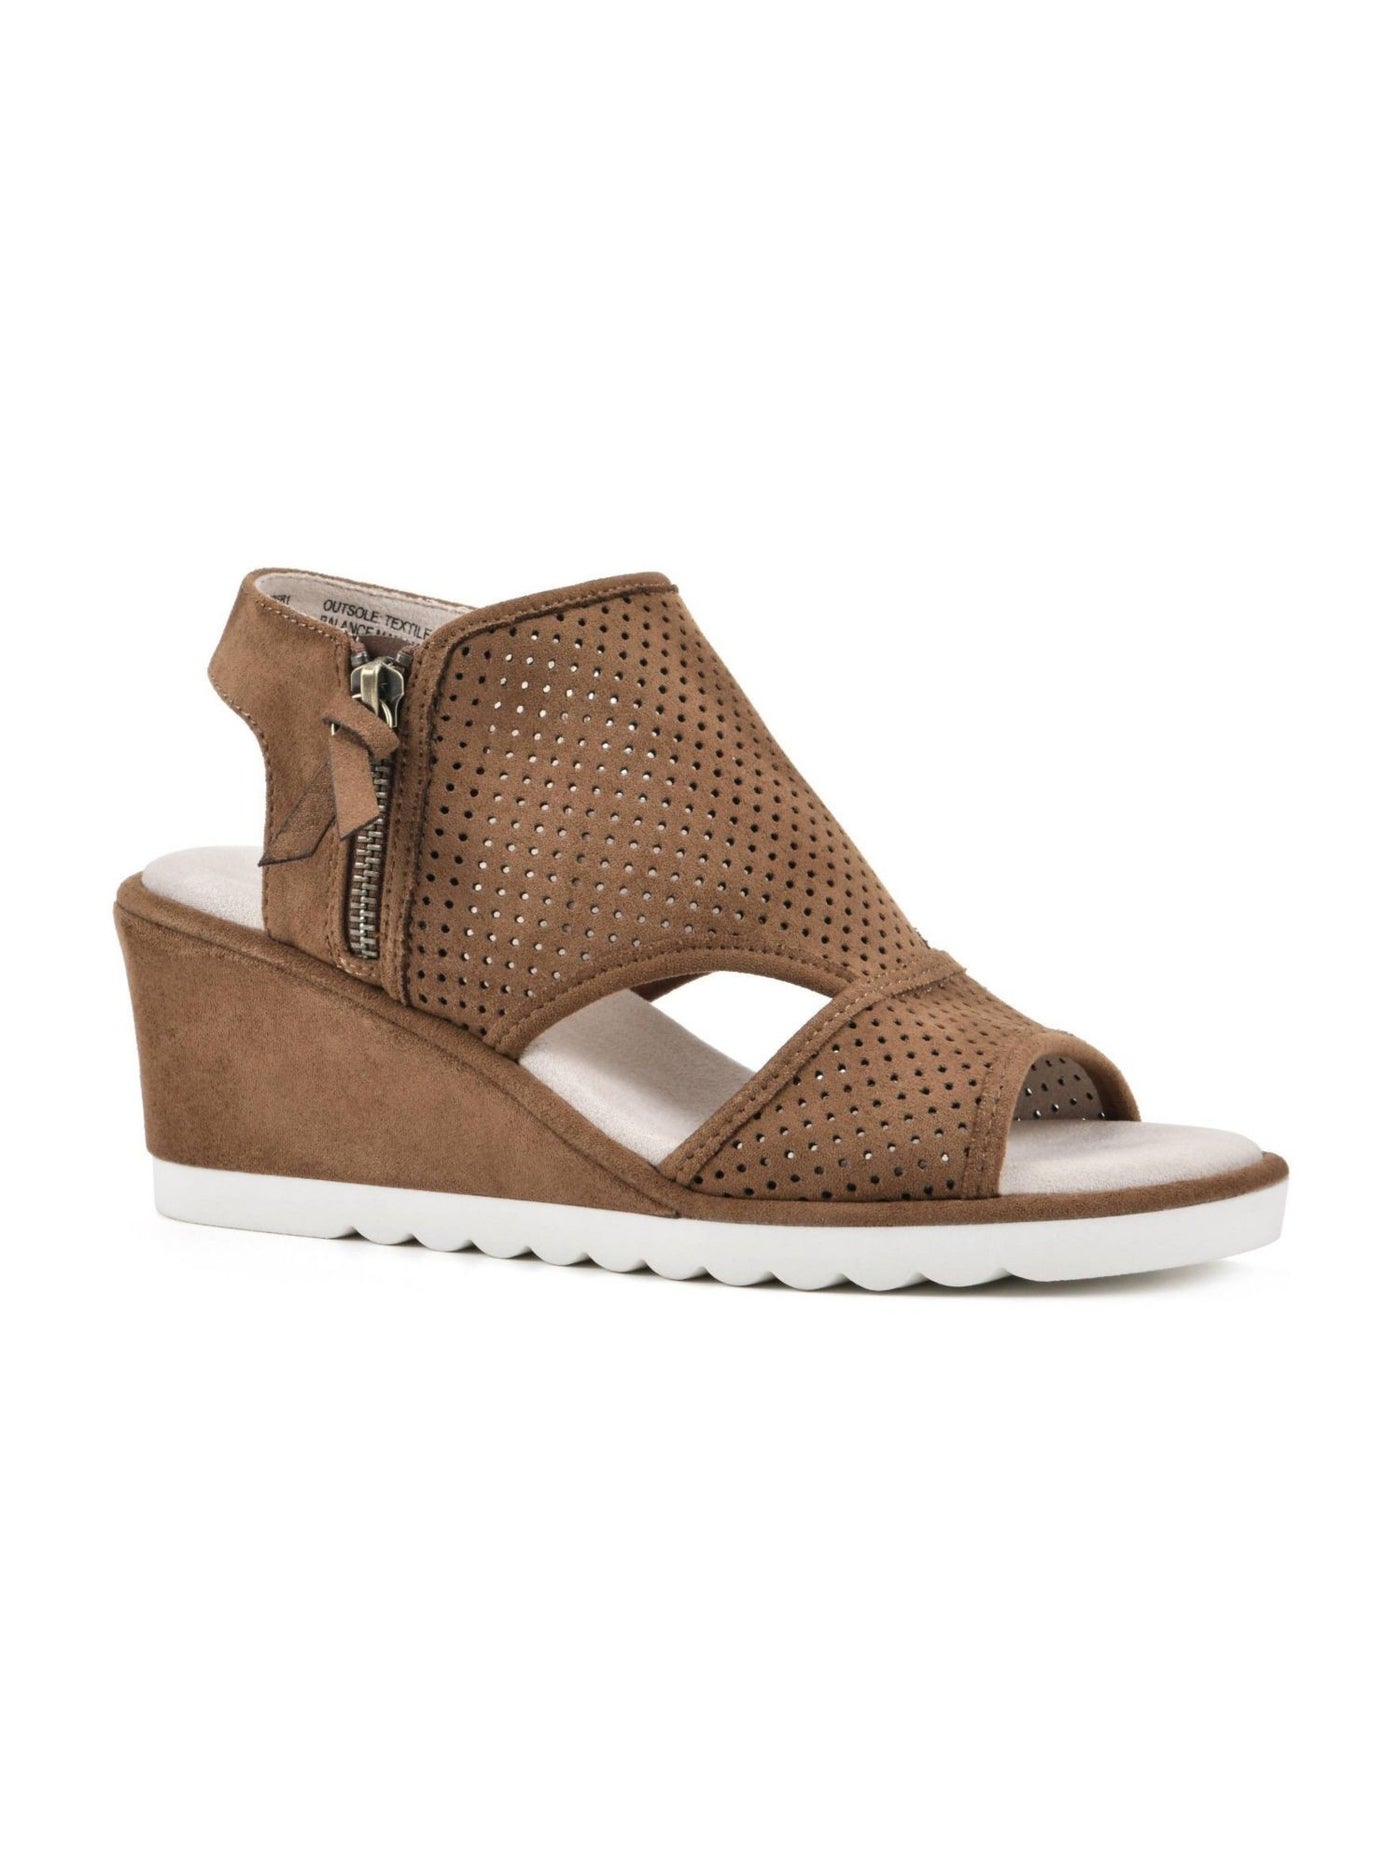 CLIFFS BY WHITE MOUNTAIN Womens Brown Perforated Cushioned Abby Round Toe Wedge Zip-Up Slingback Sandal 9 M